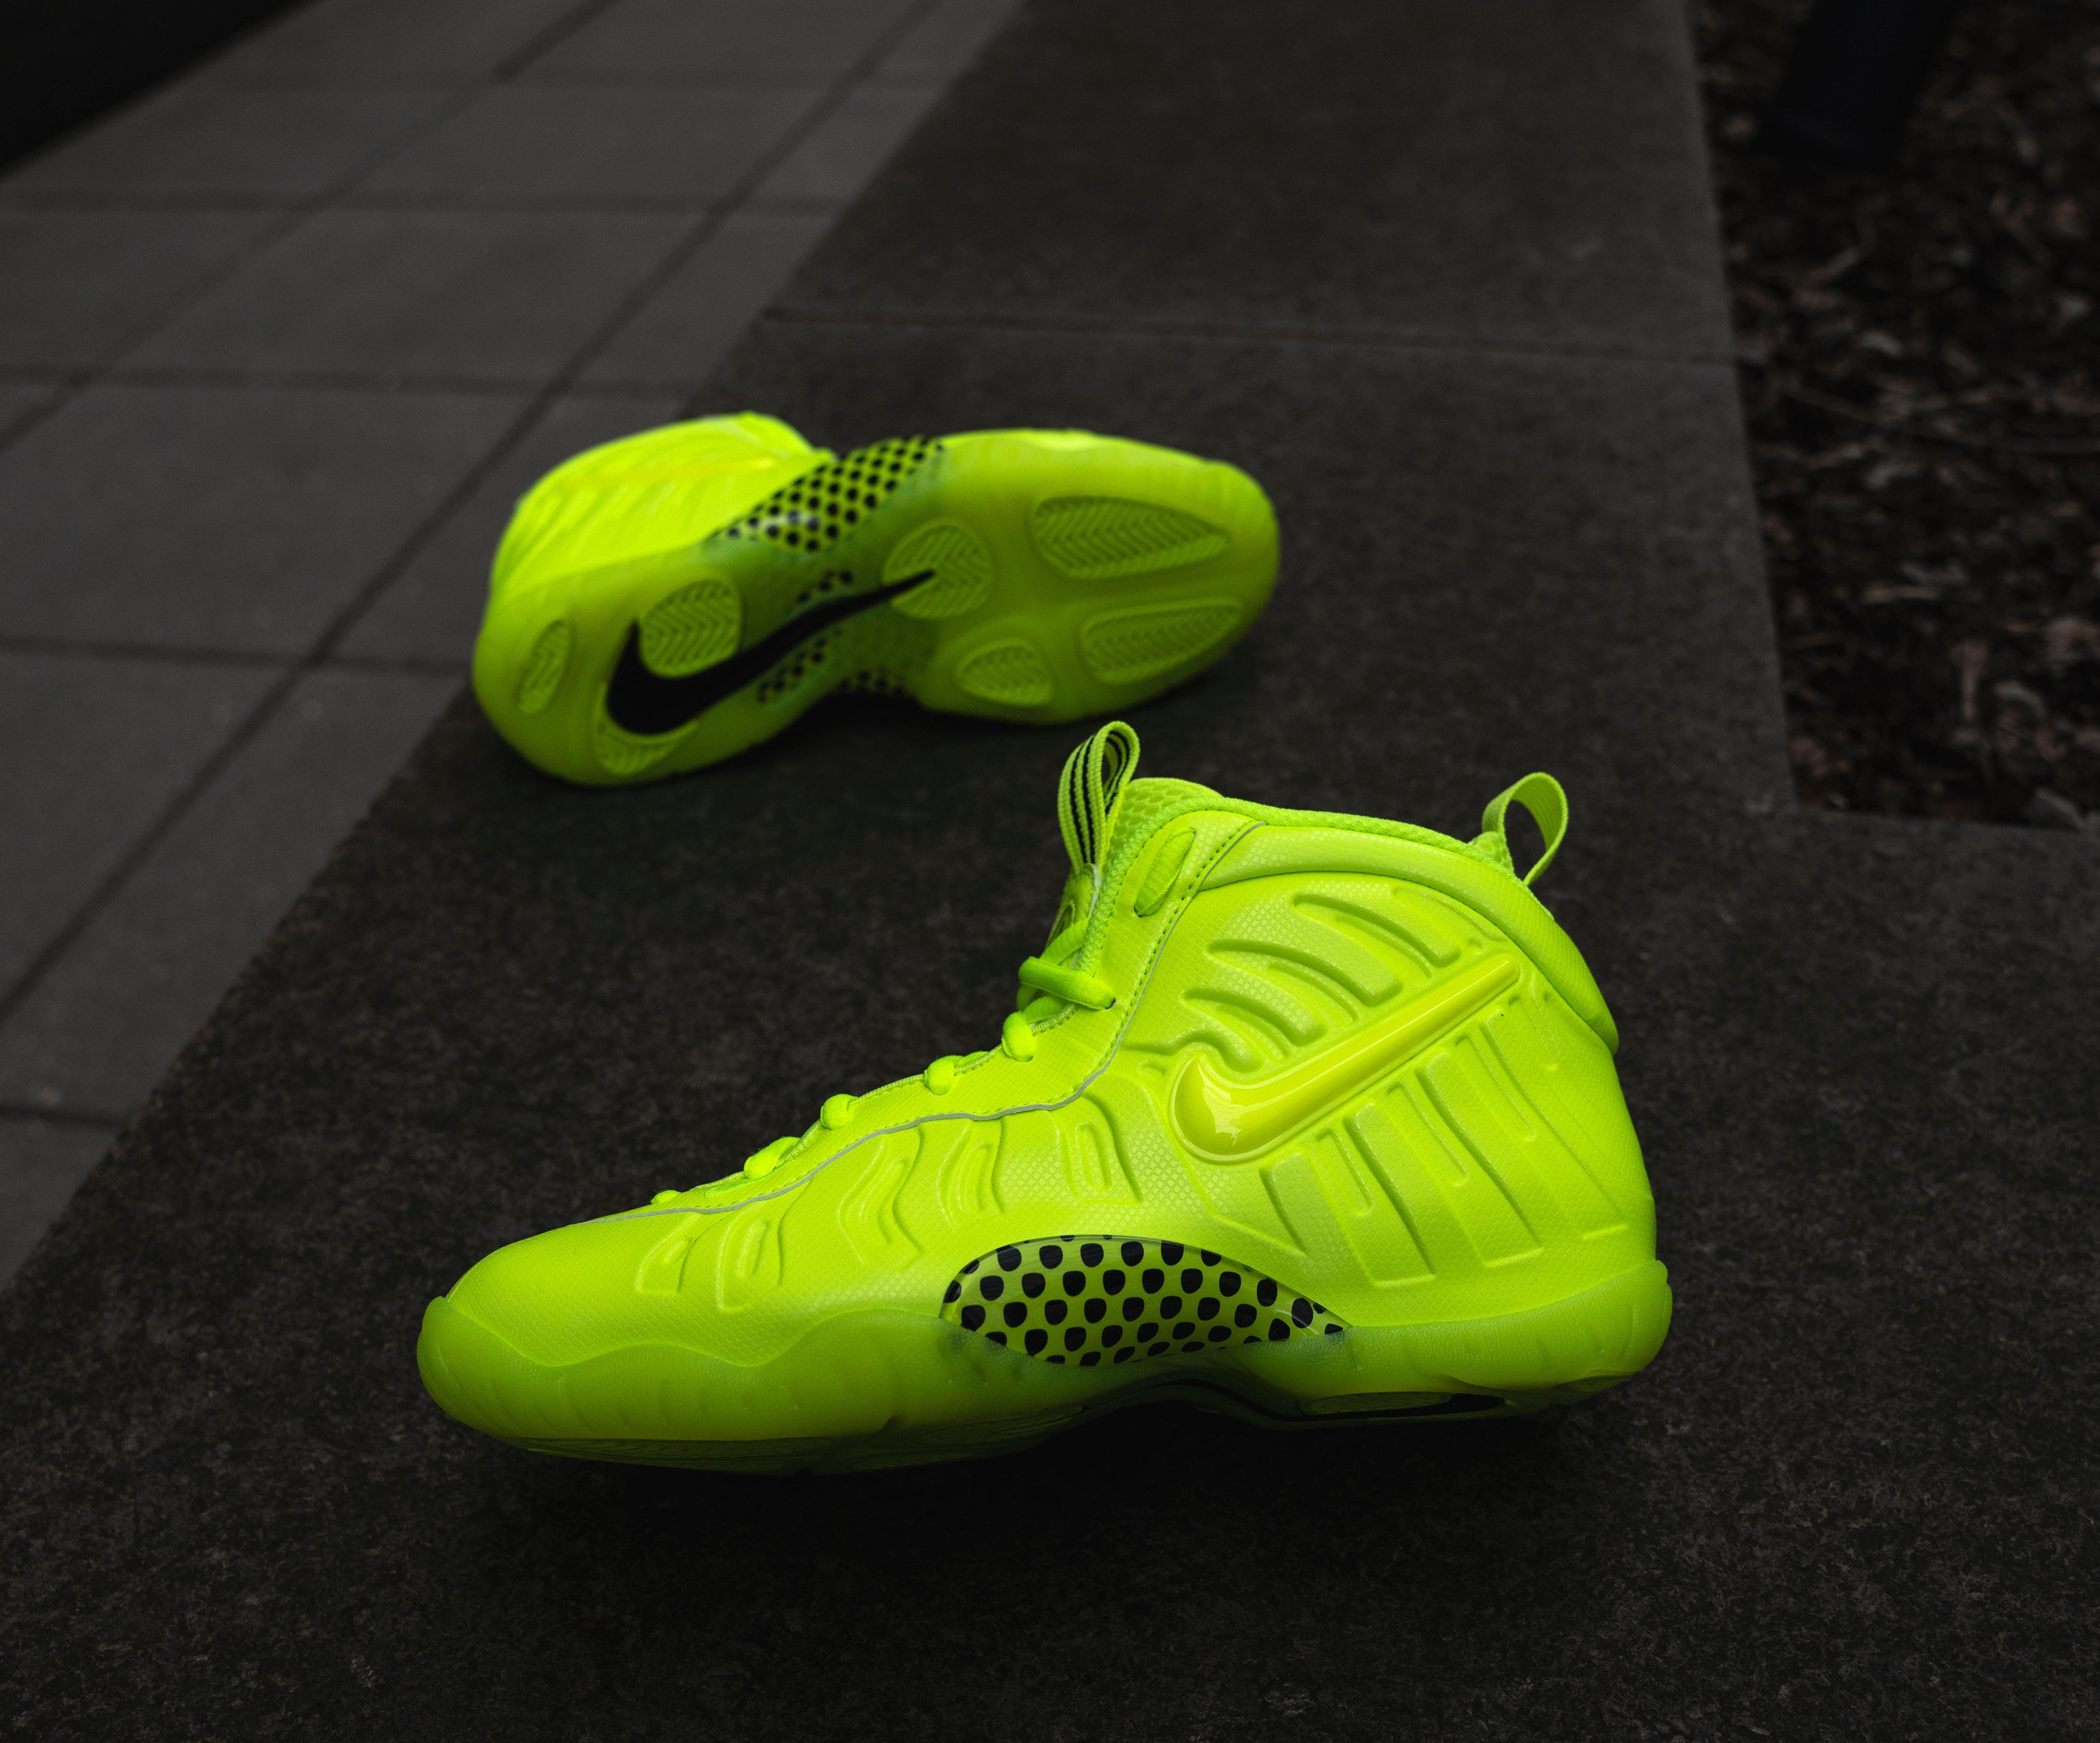 Sneakers Release – Nike Air Foamposite and Little Posite Pro